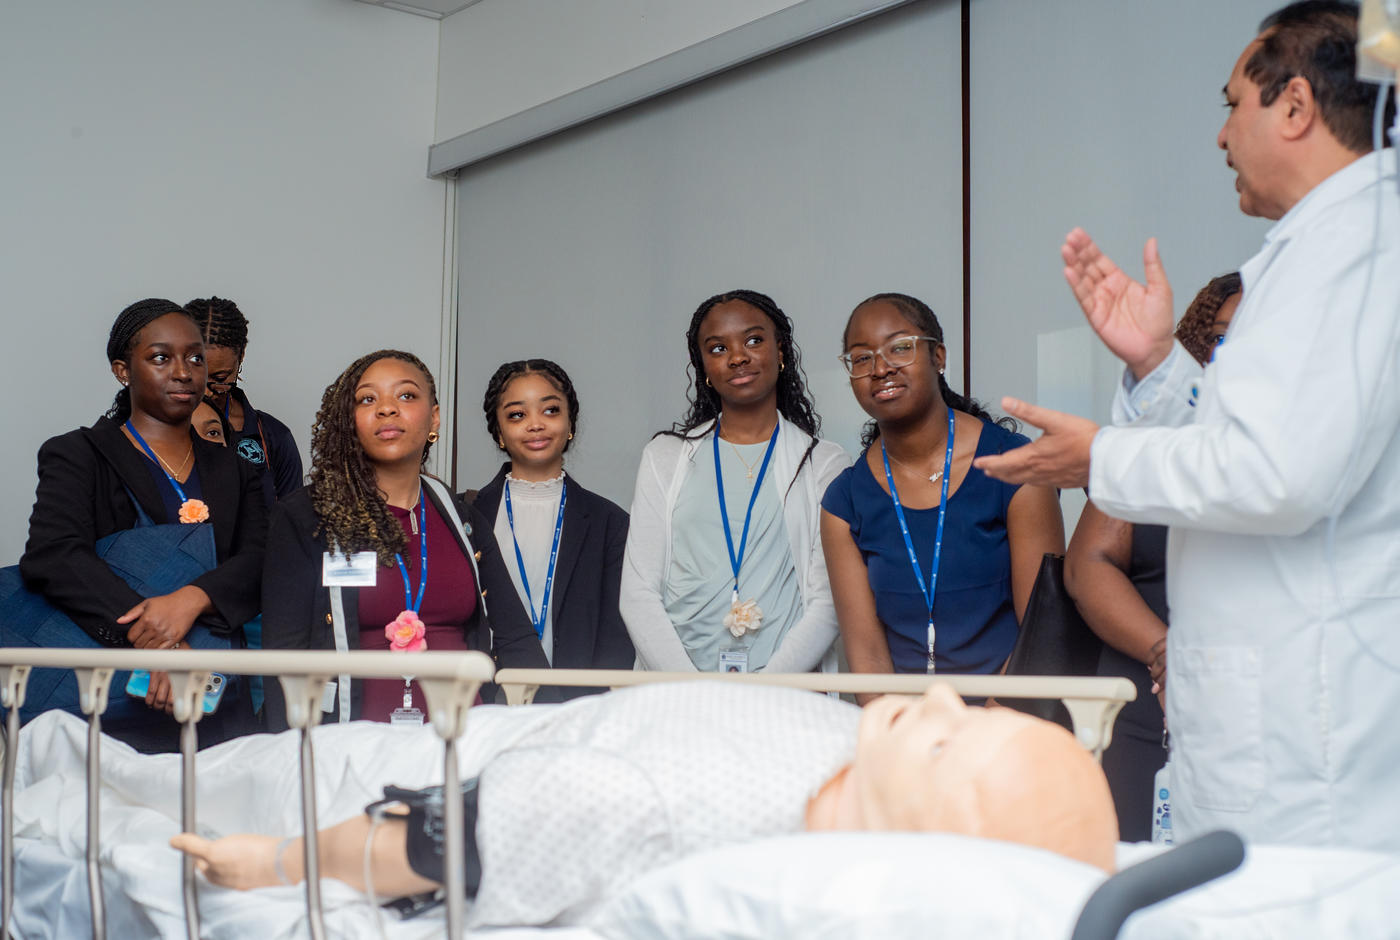 Dr. Rakesh Calton gives Spelman students a tour of RUSM’s simulation institute